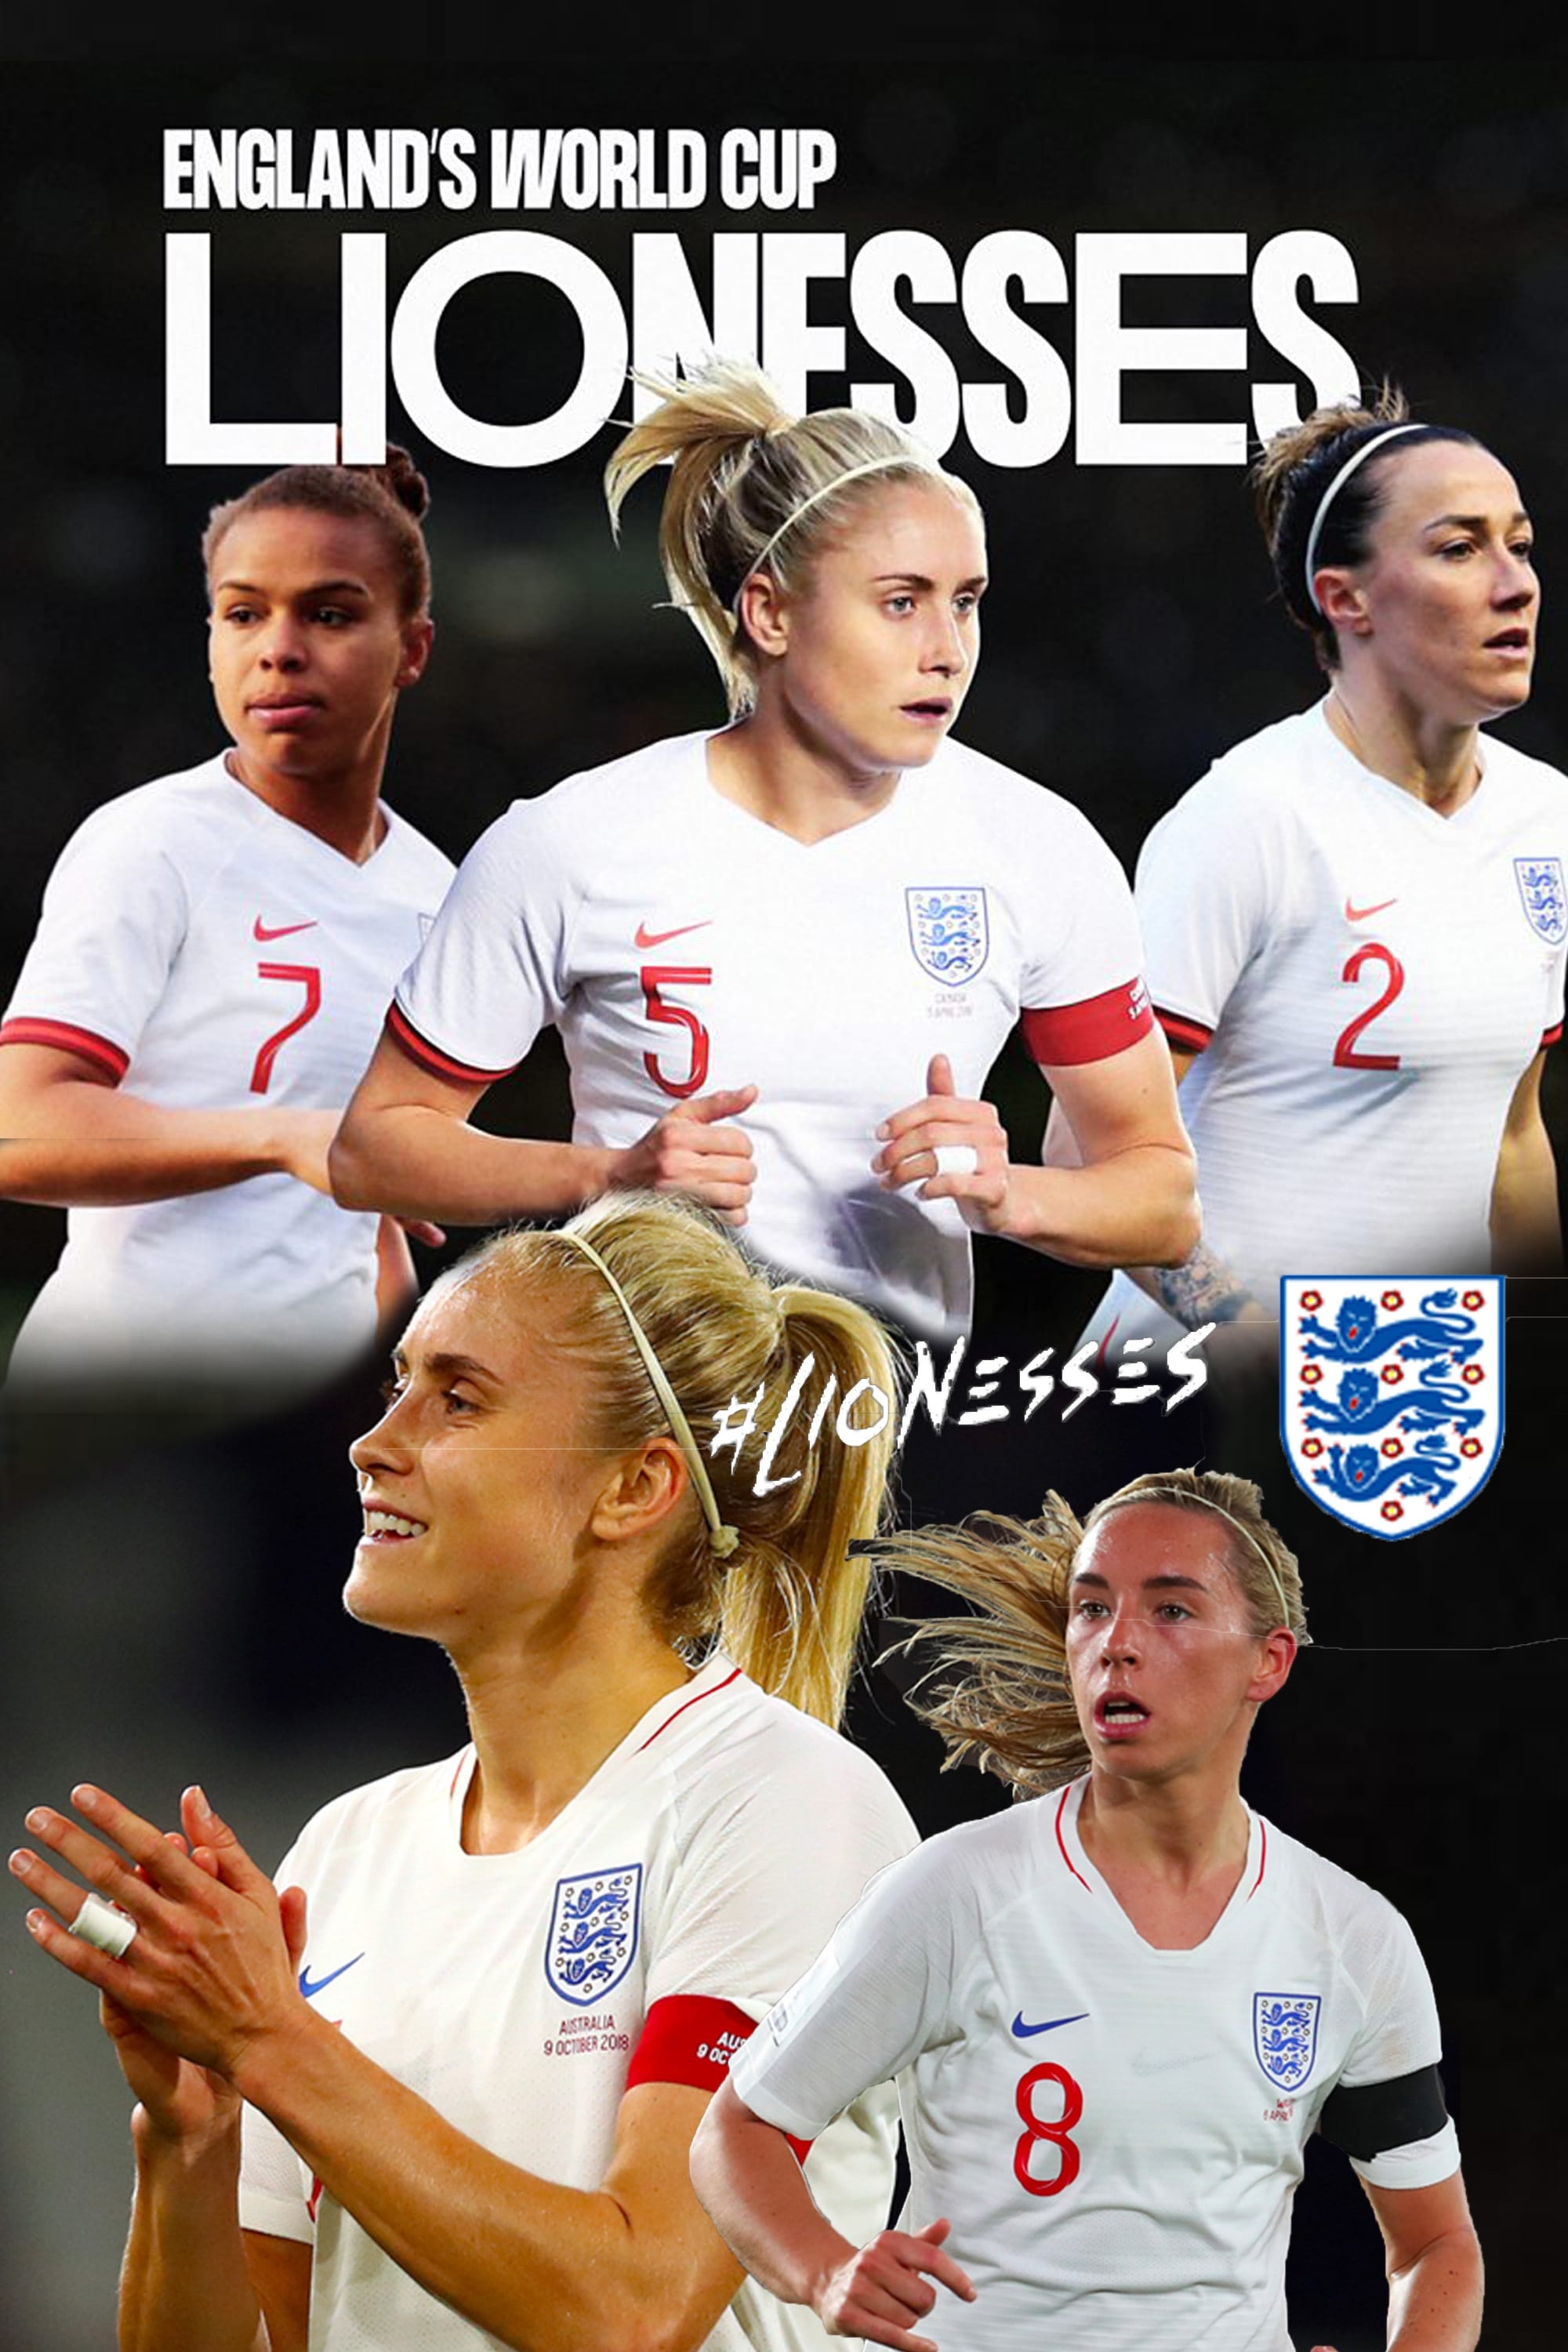 England’s World Cup Lionesses